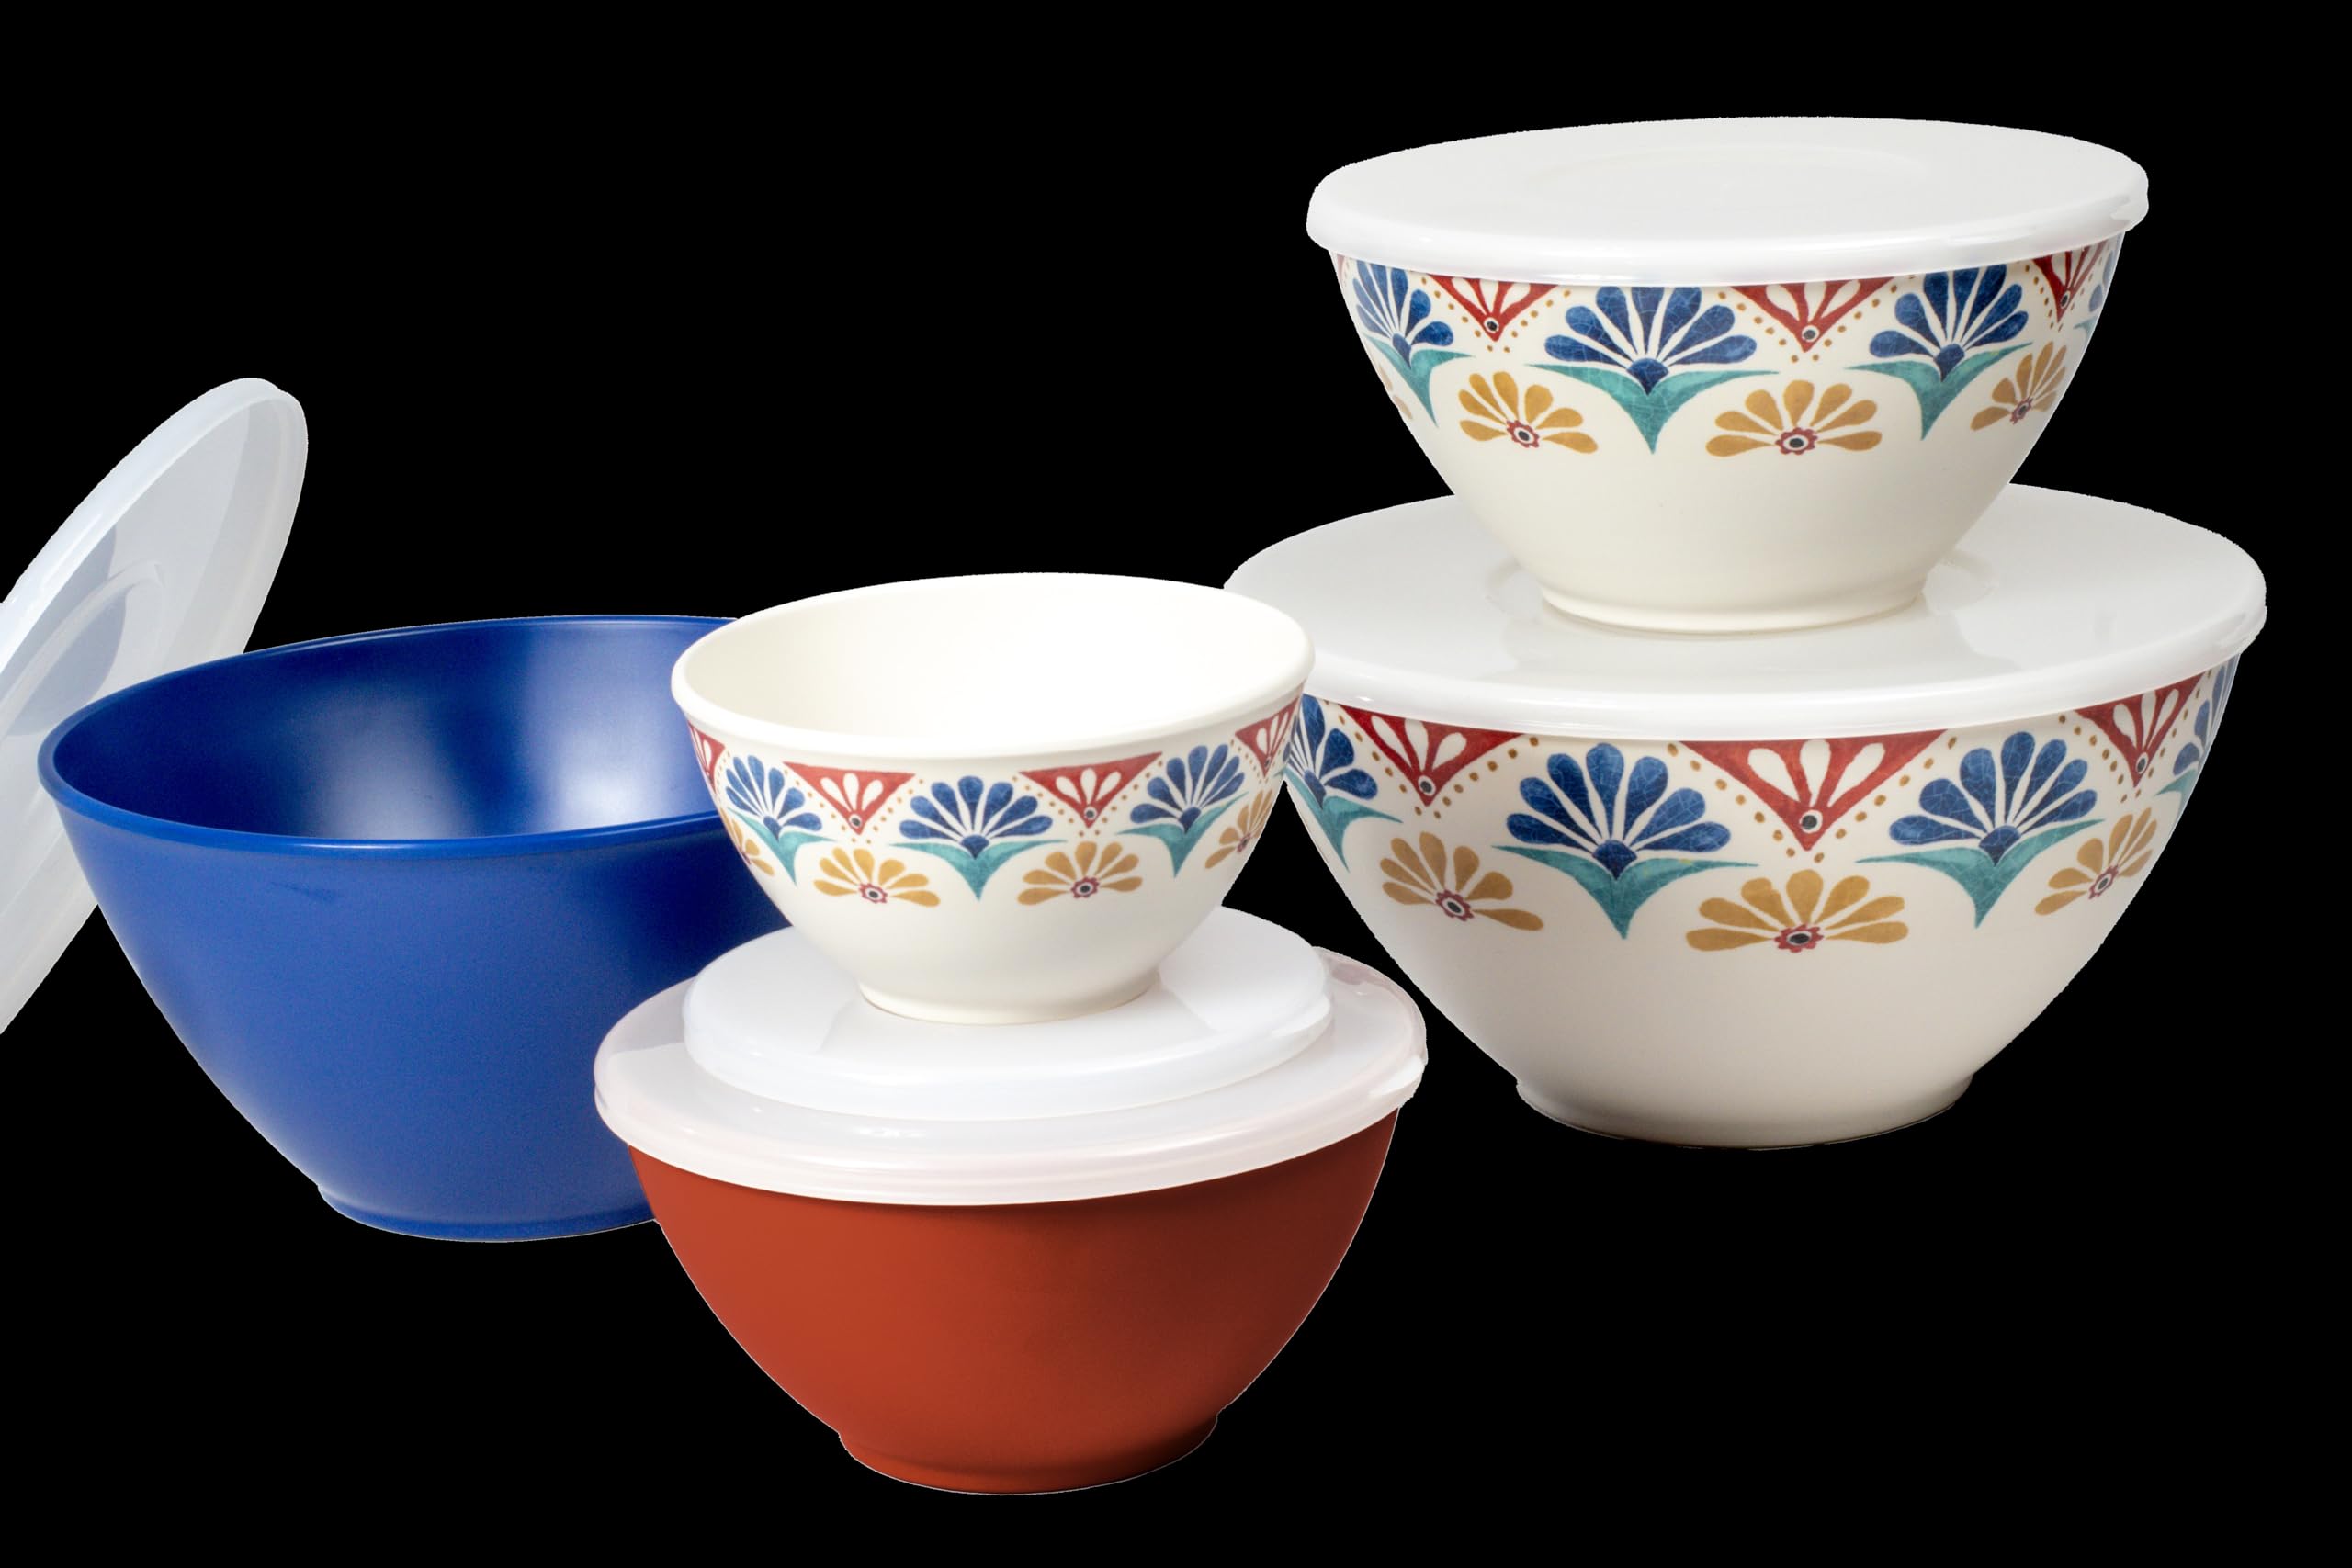 Abode Homewares by TarHong Rio Medallion Set of 5 Melamine Mixing Bowls with Lids for Mixing and Kitchen Storage